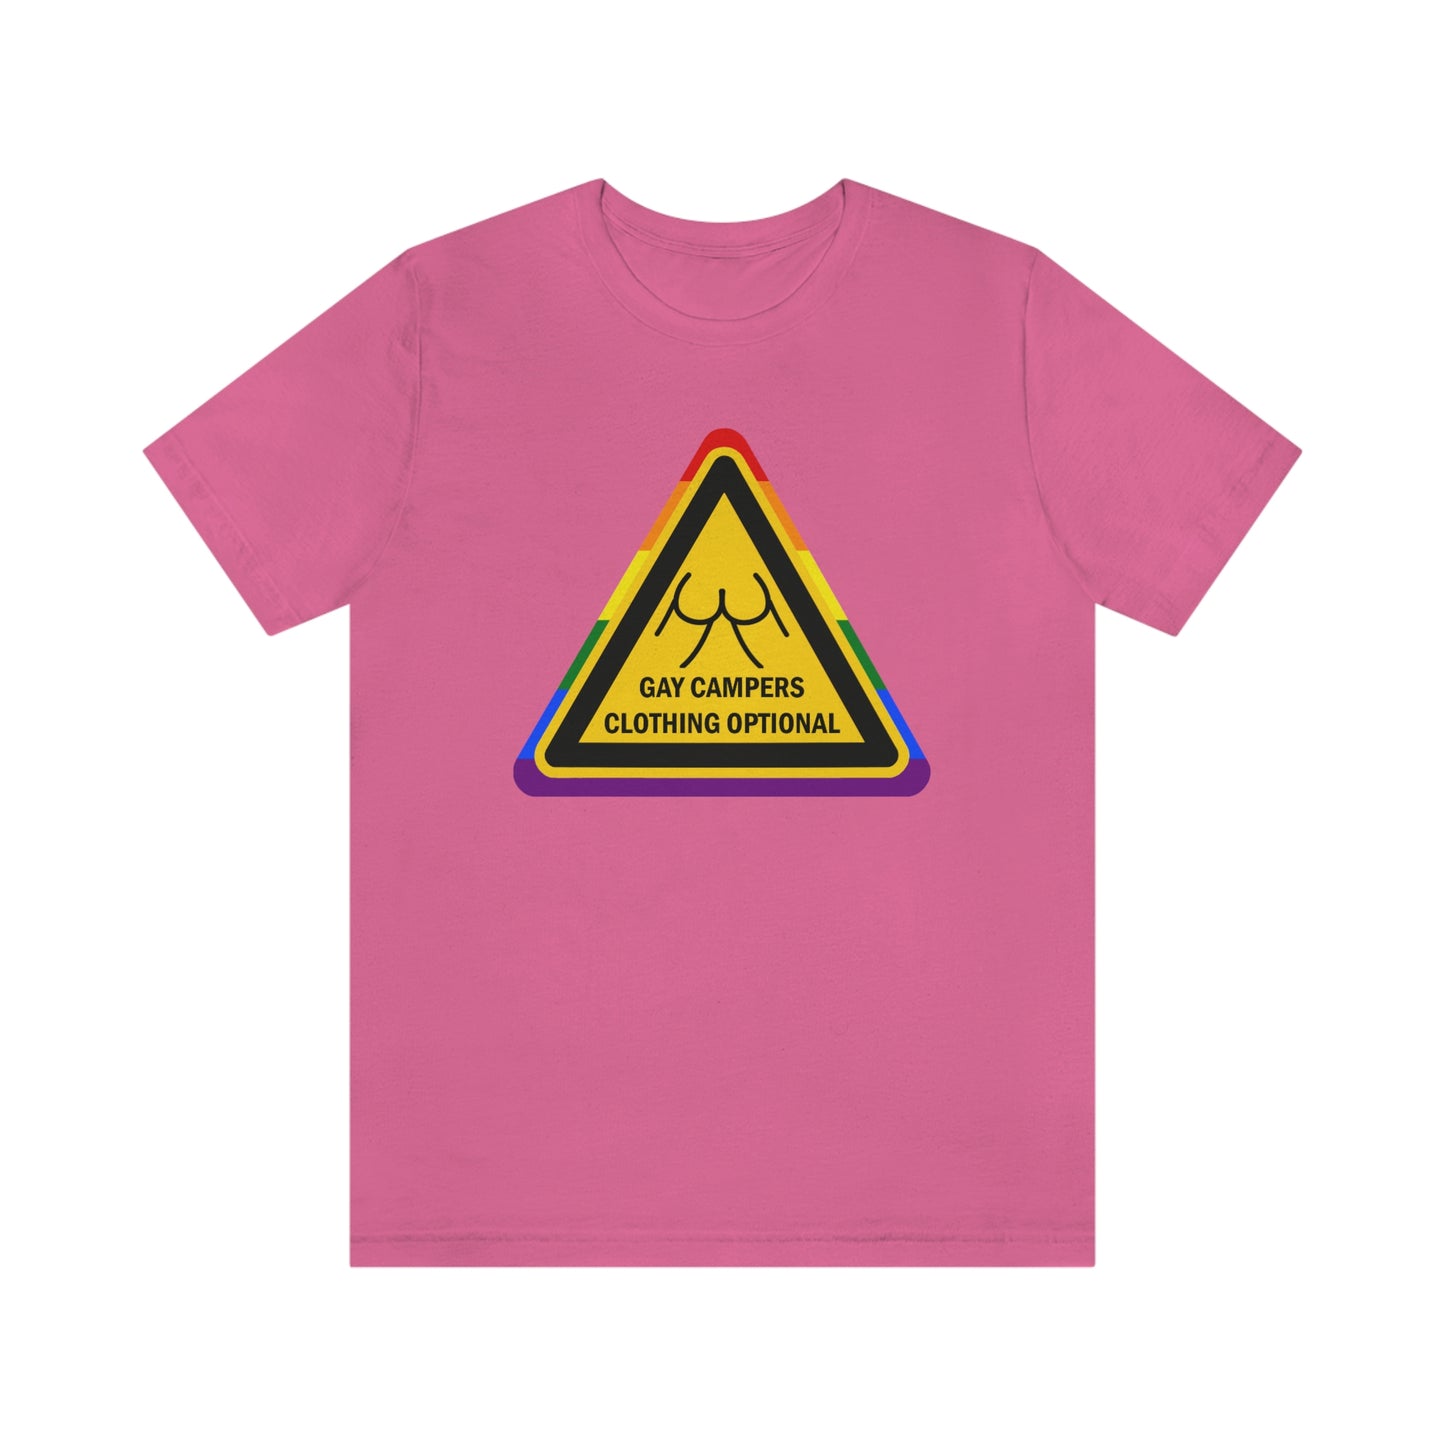 Gay Campers - Clothing Optional Warning Sign Adult Unisex T-Shirt